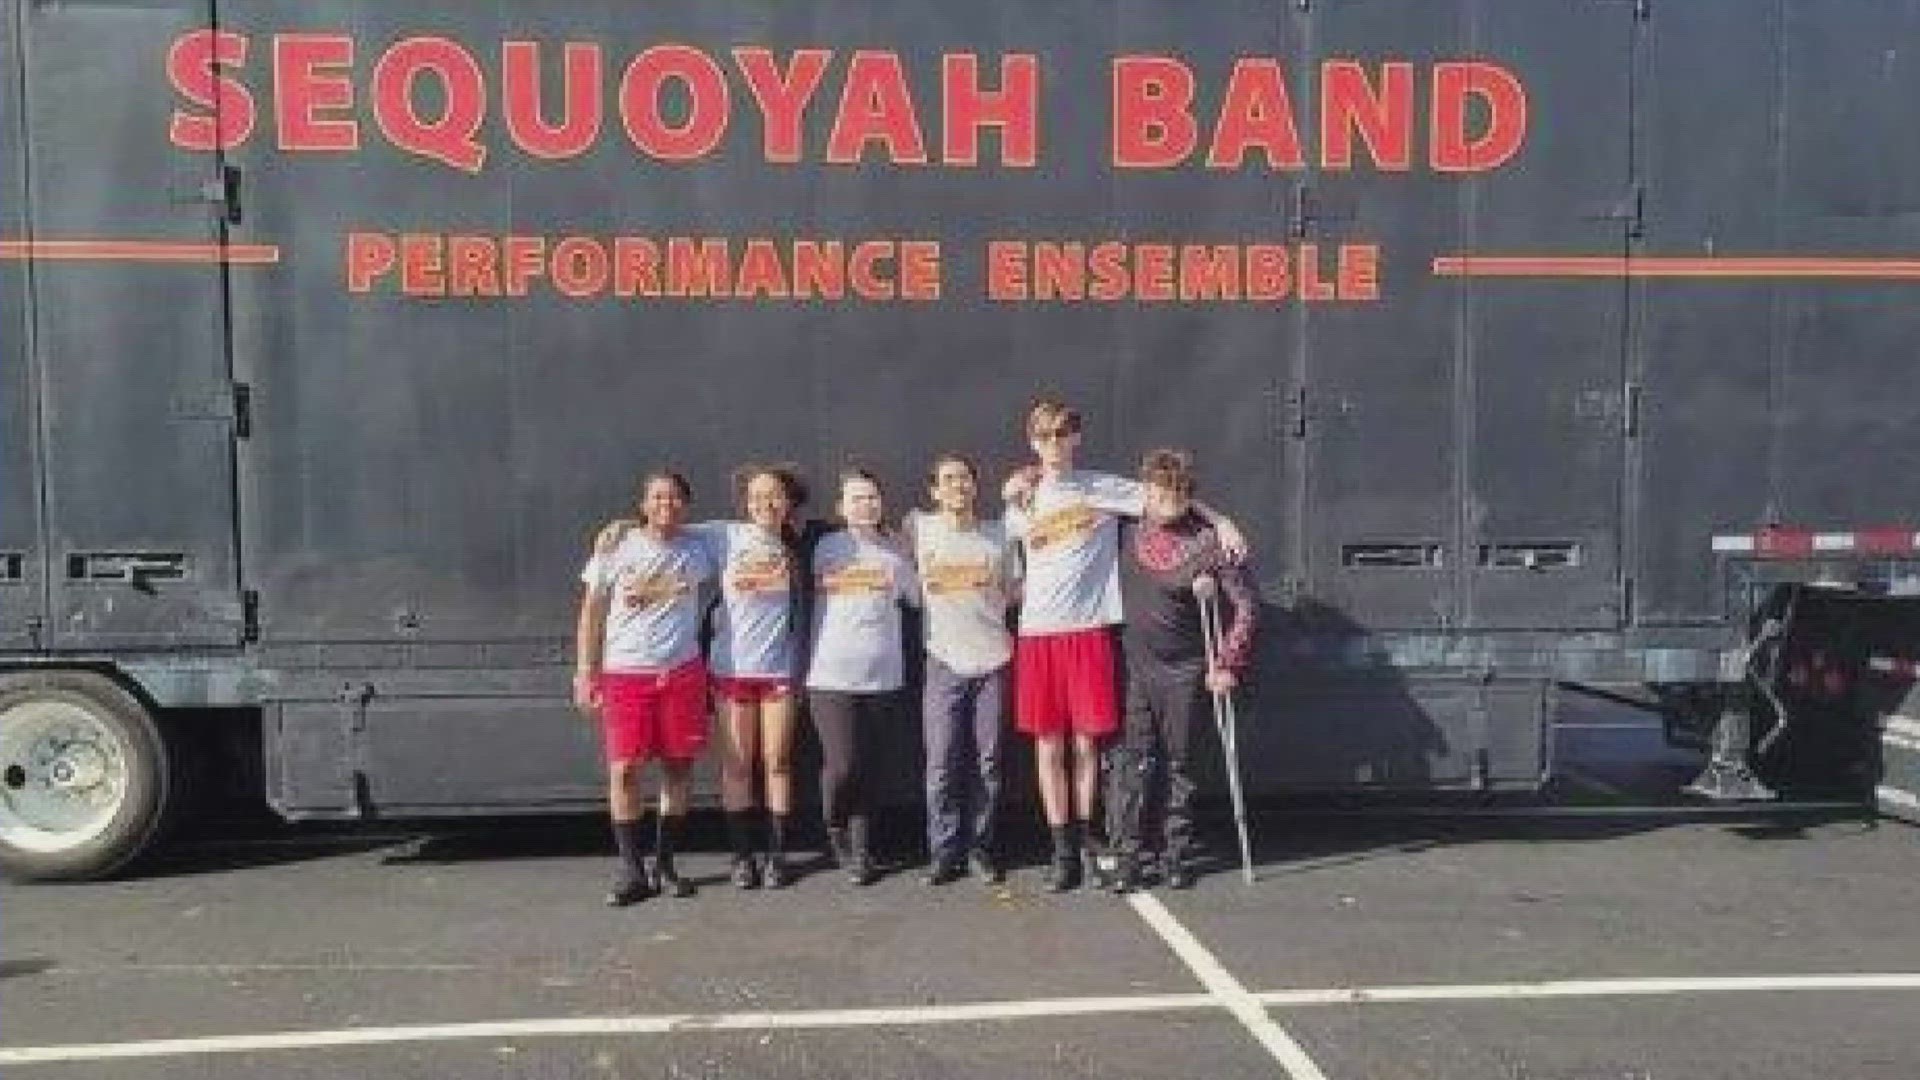 Many parents in Monroe County said they felt it was unfair for the students' band season to be put on hold.